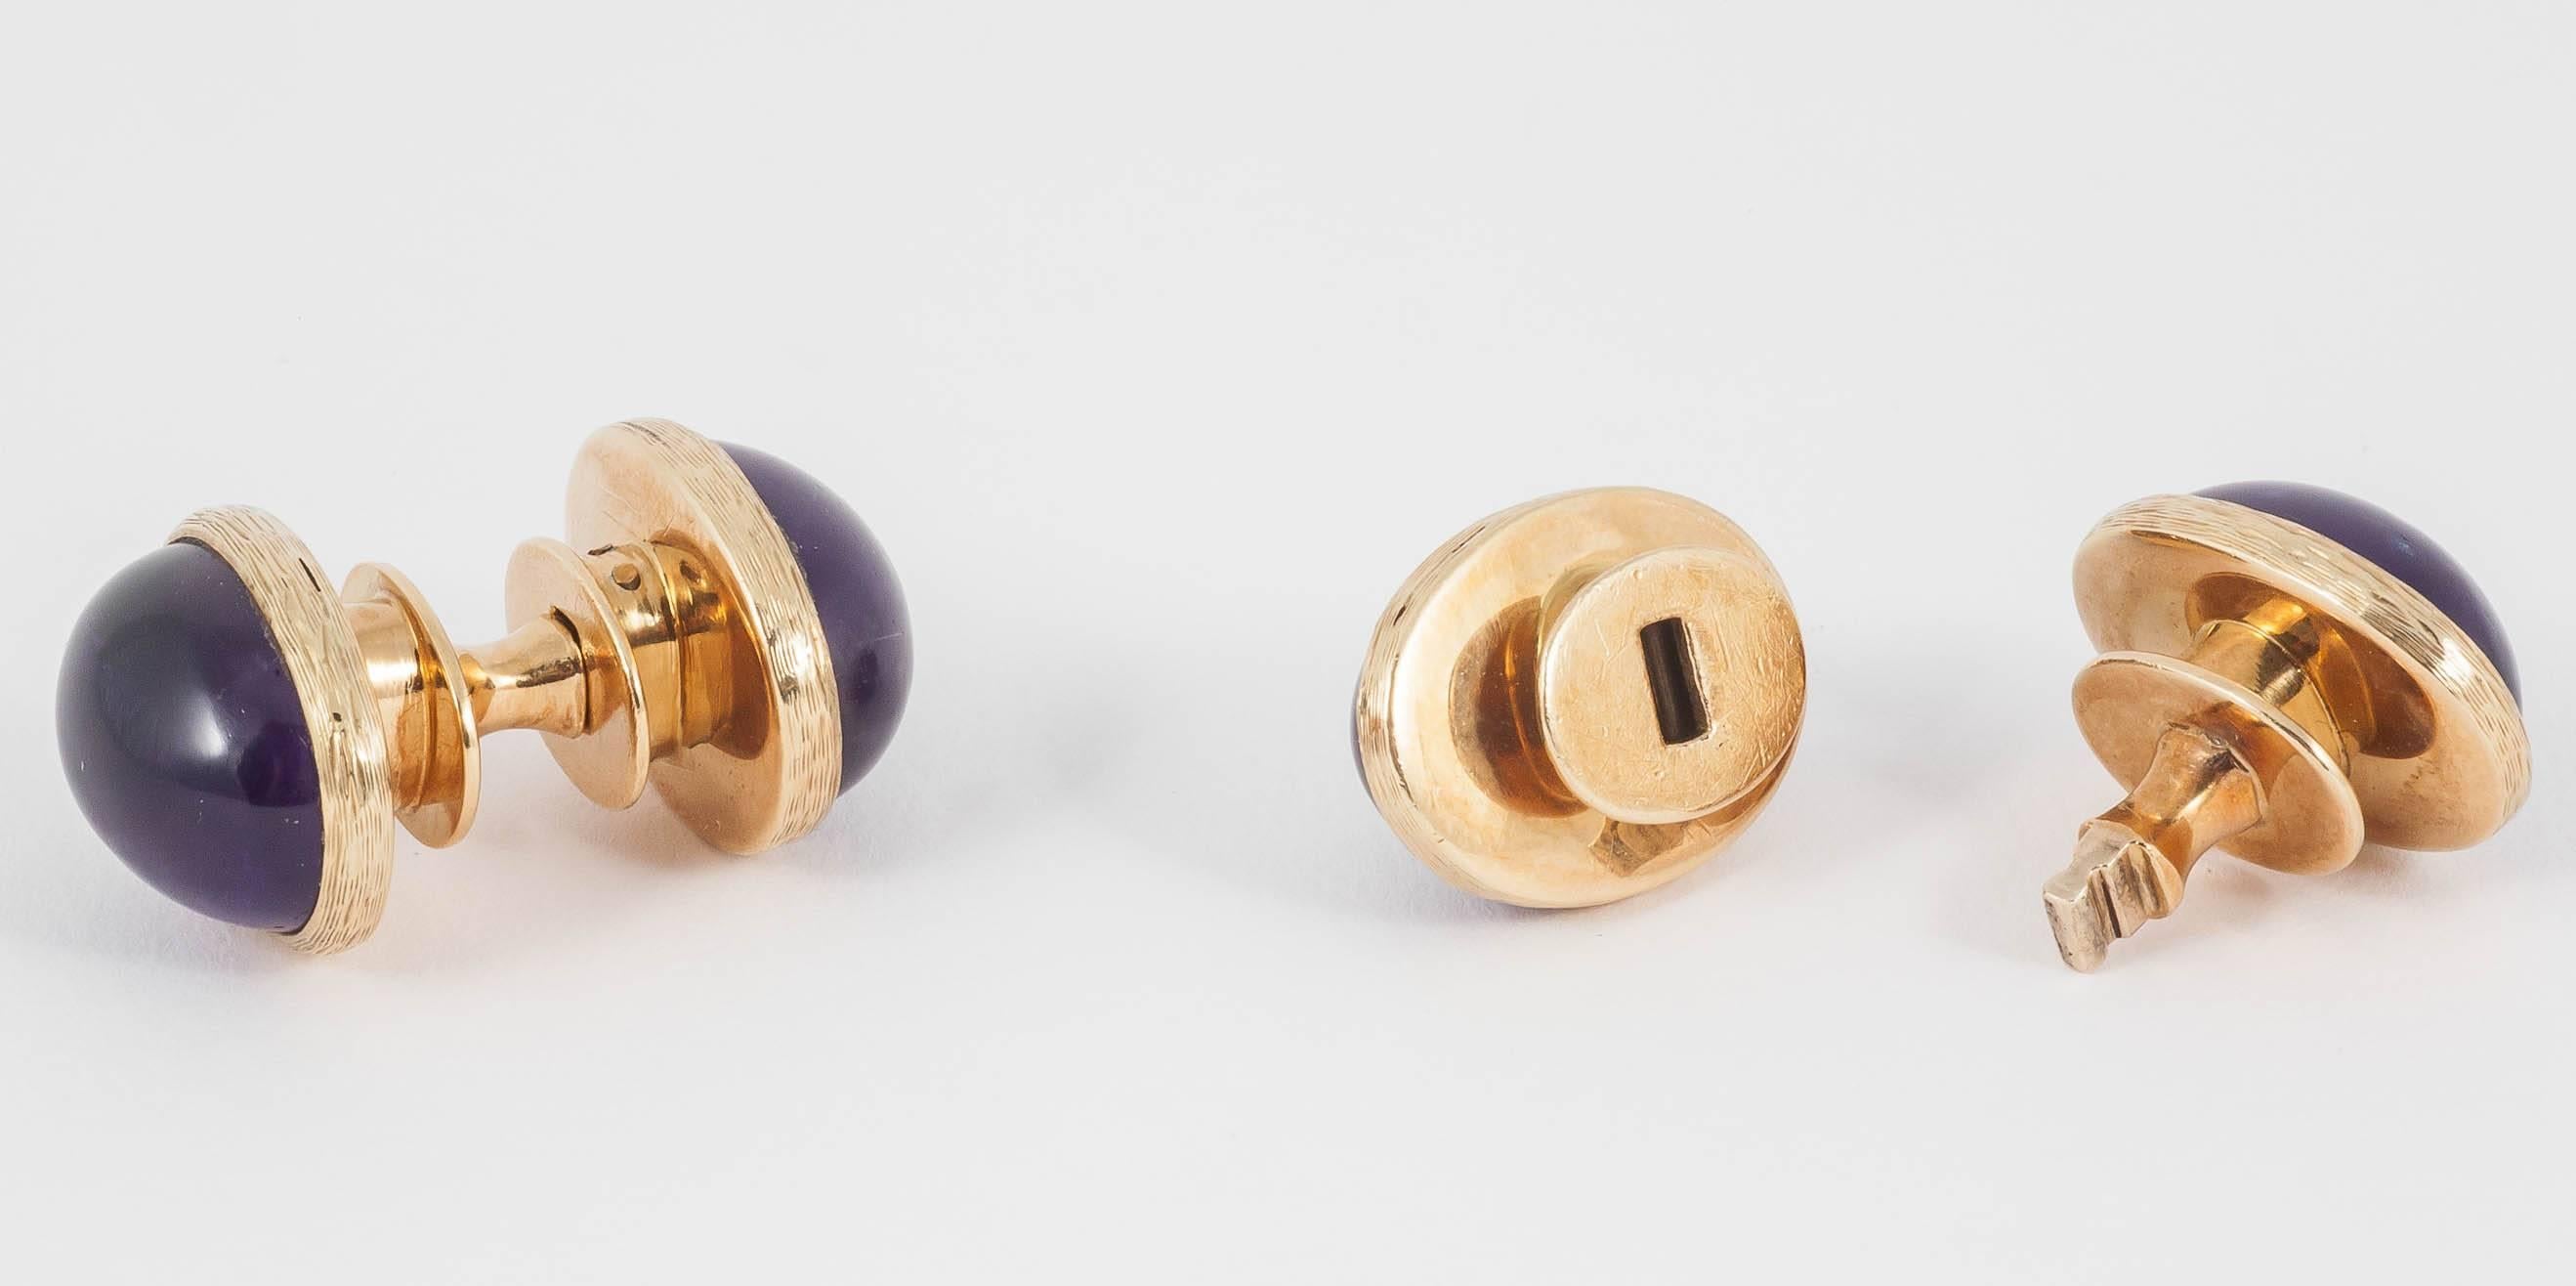 Men's Snap-In Design Cufflinks with Cabochon Amethysts in 18 Carat Gold, London 1982 For Sale